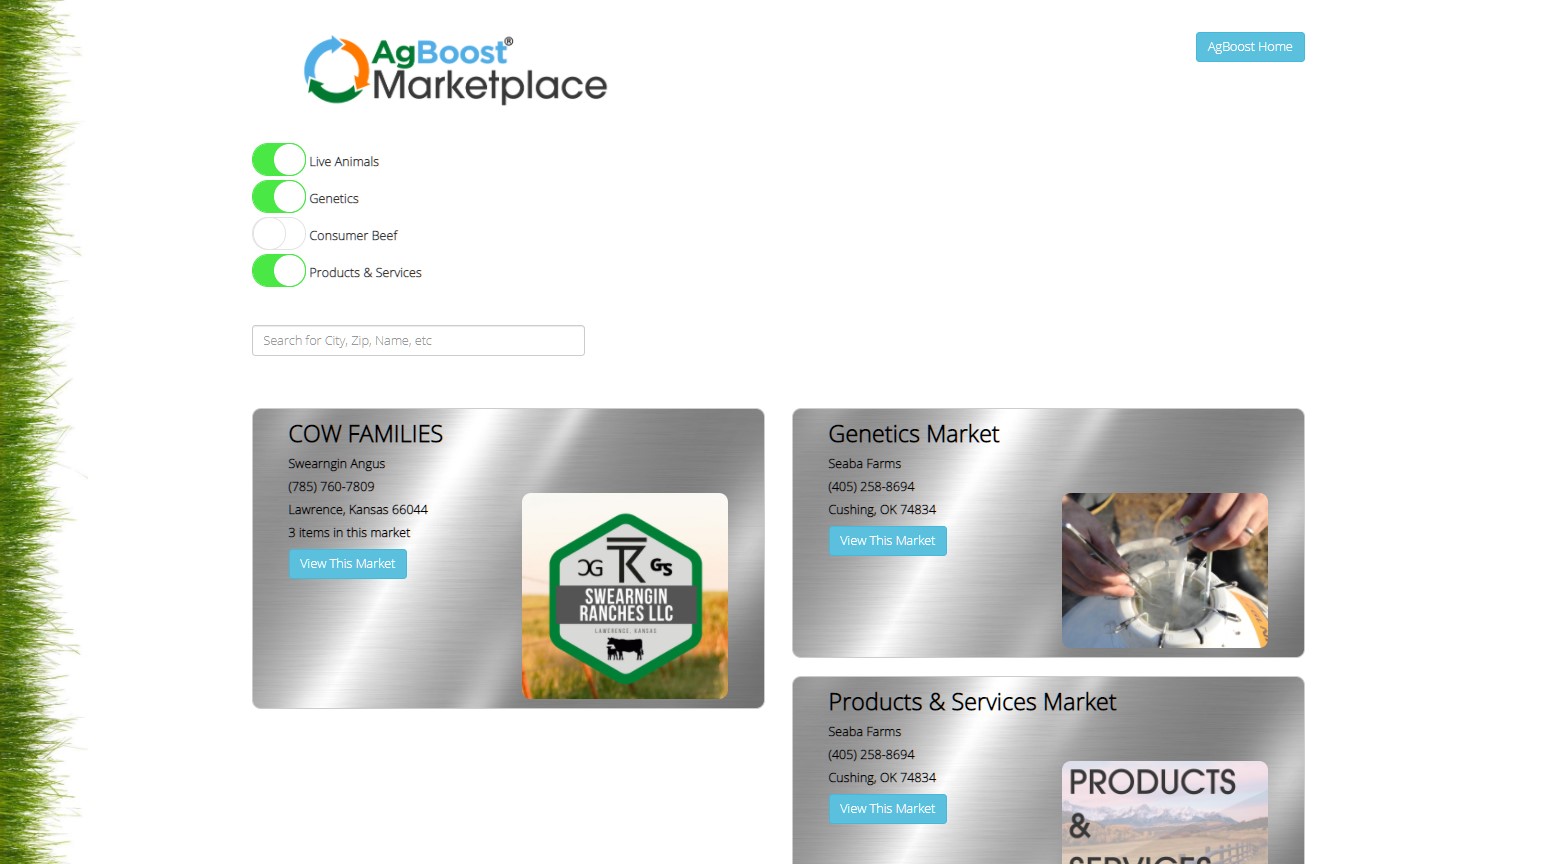 AgBoost MarketPlace